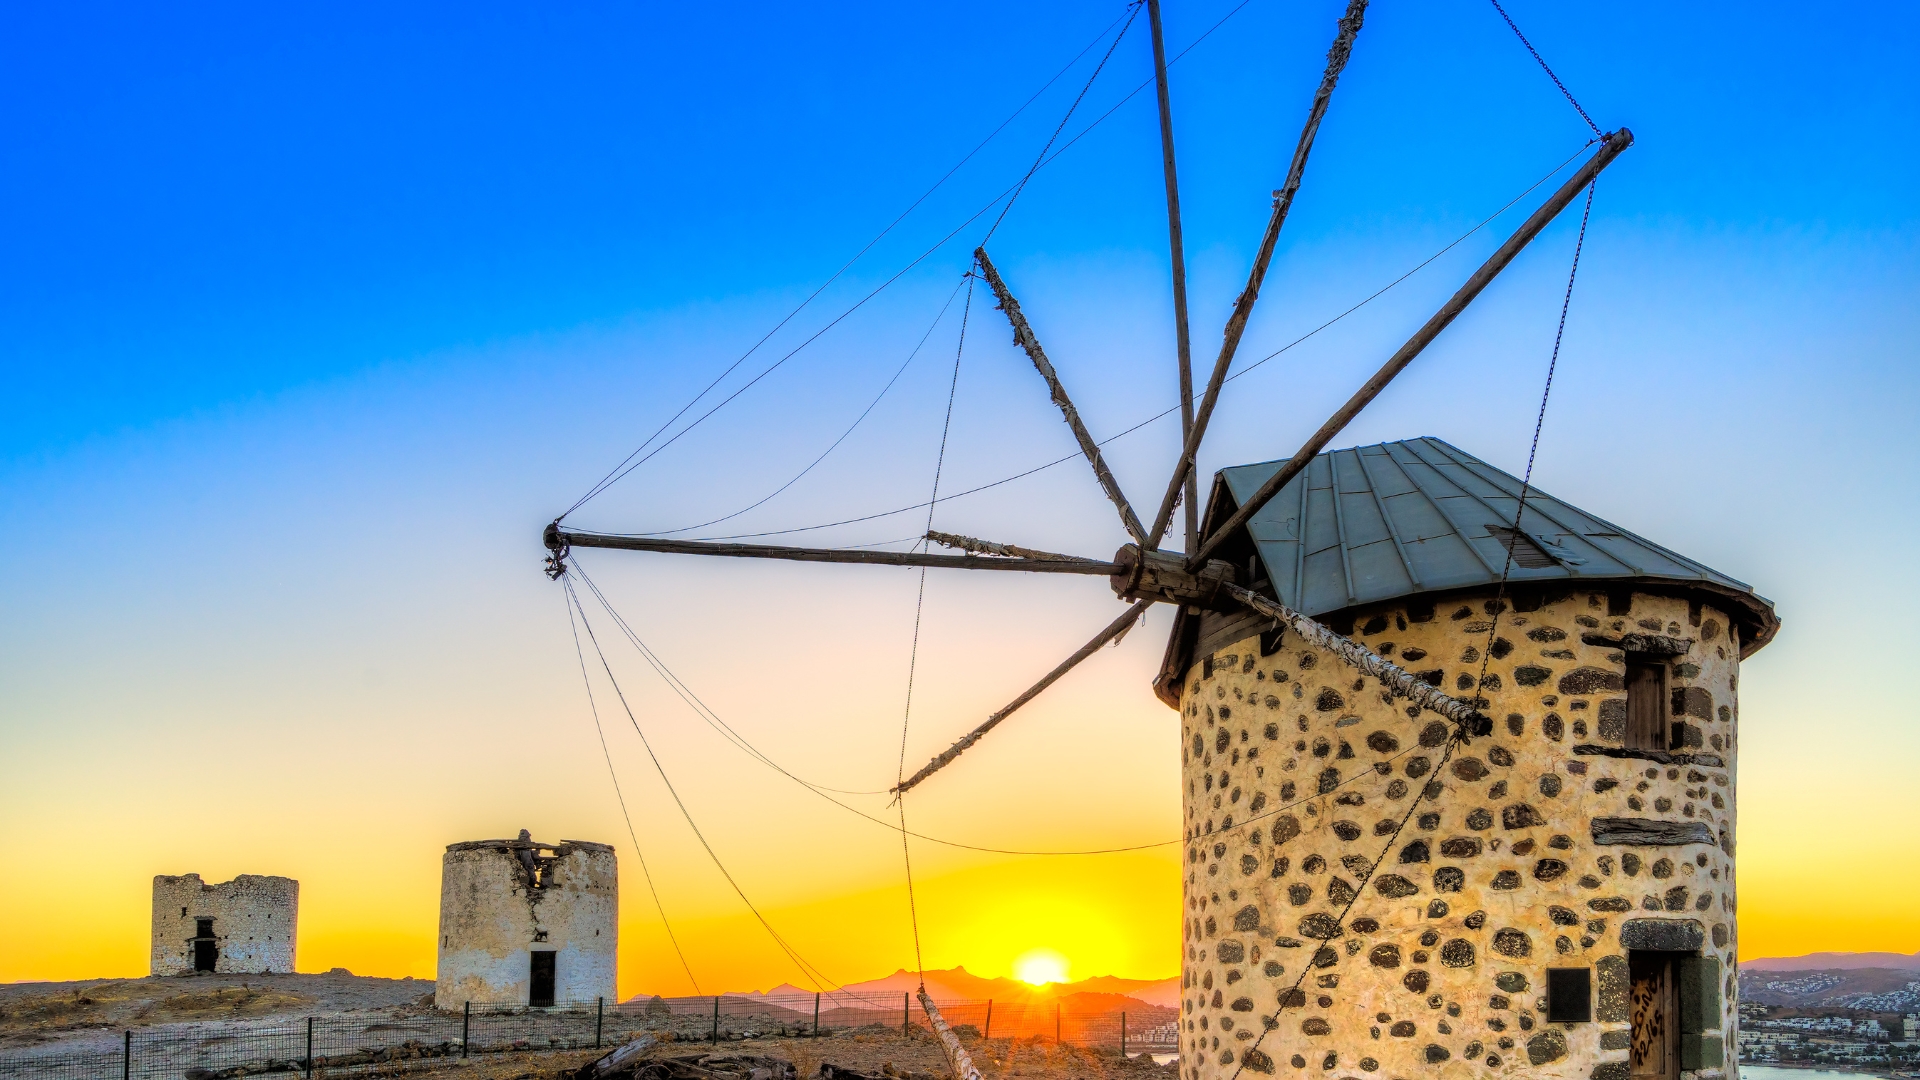 The windmills of Bodrum